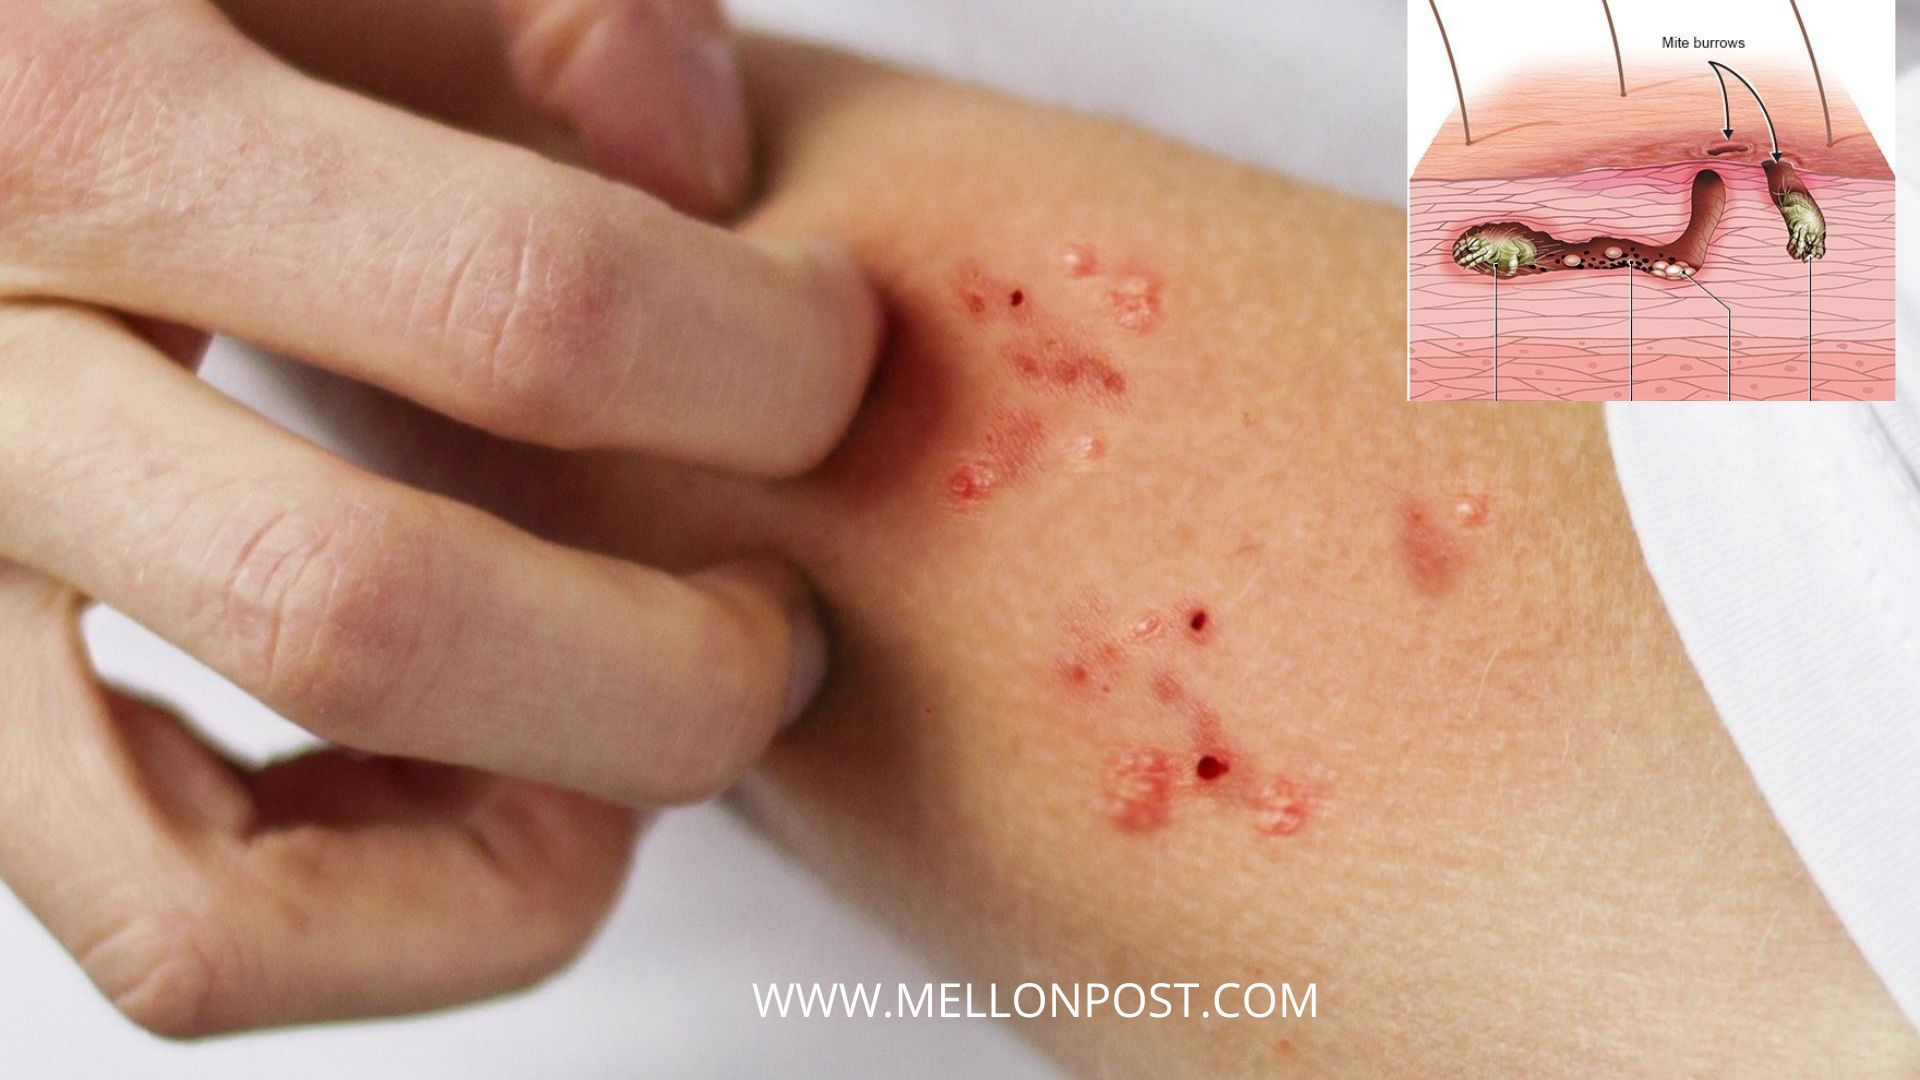 Treatments of Scabies: Kill the Infestation Quickly